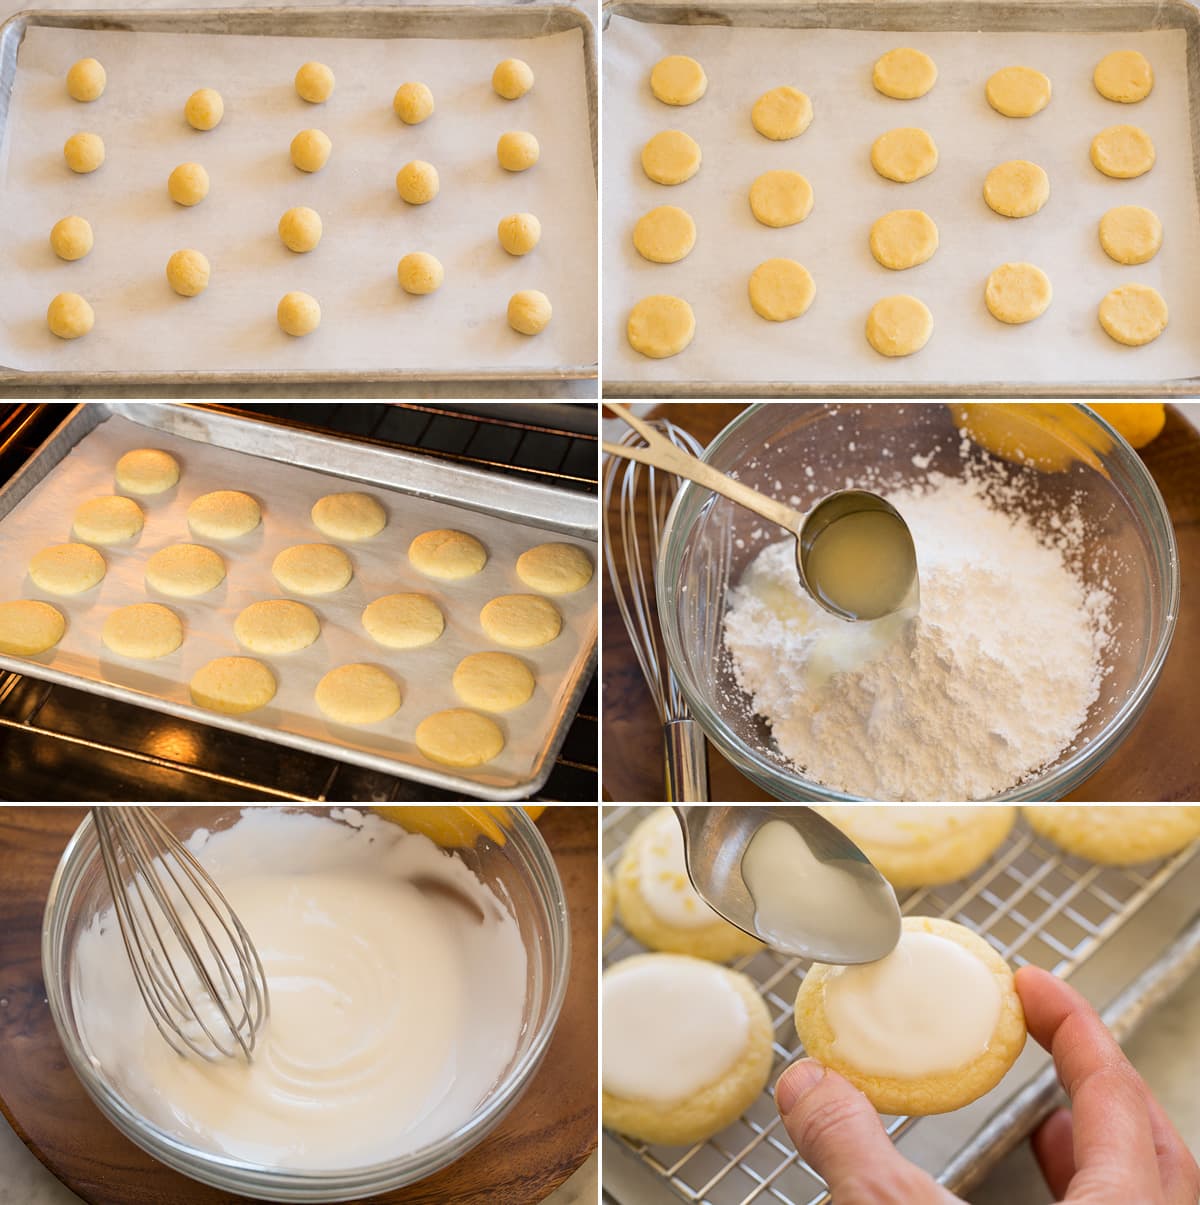 Collage of six photos showing how to roll, flatten and bake lemon meltaway cookies. Also includes photos of making glaze and spreading over cookies.